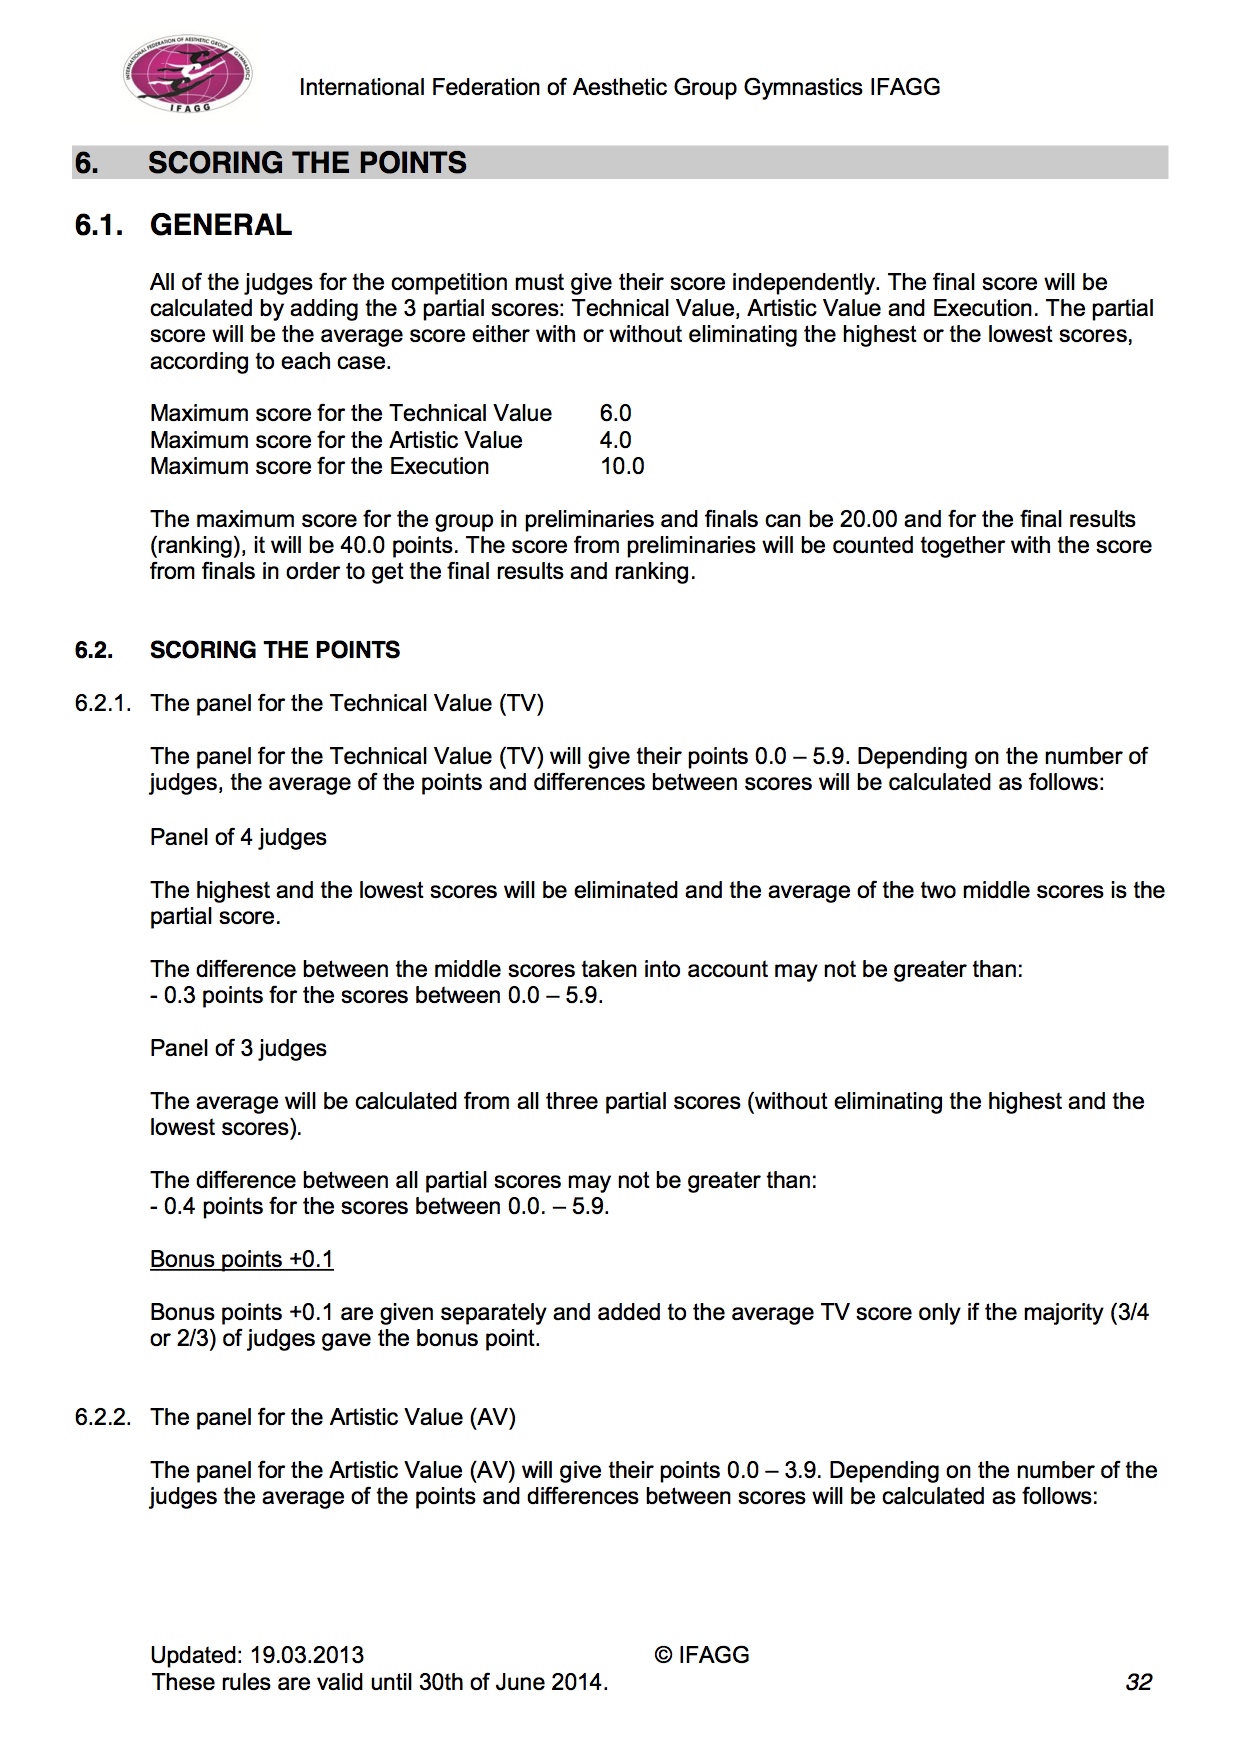 IFAGG Competition rules32.jpg